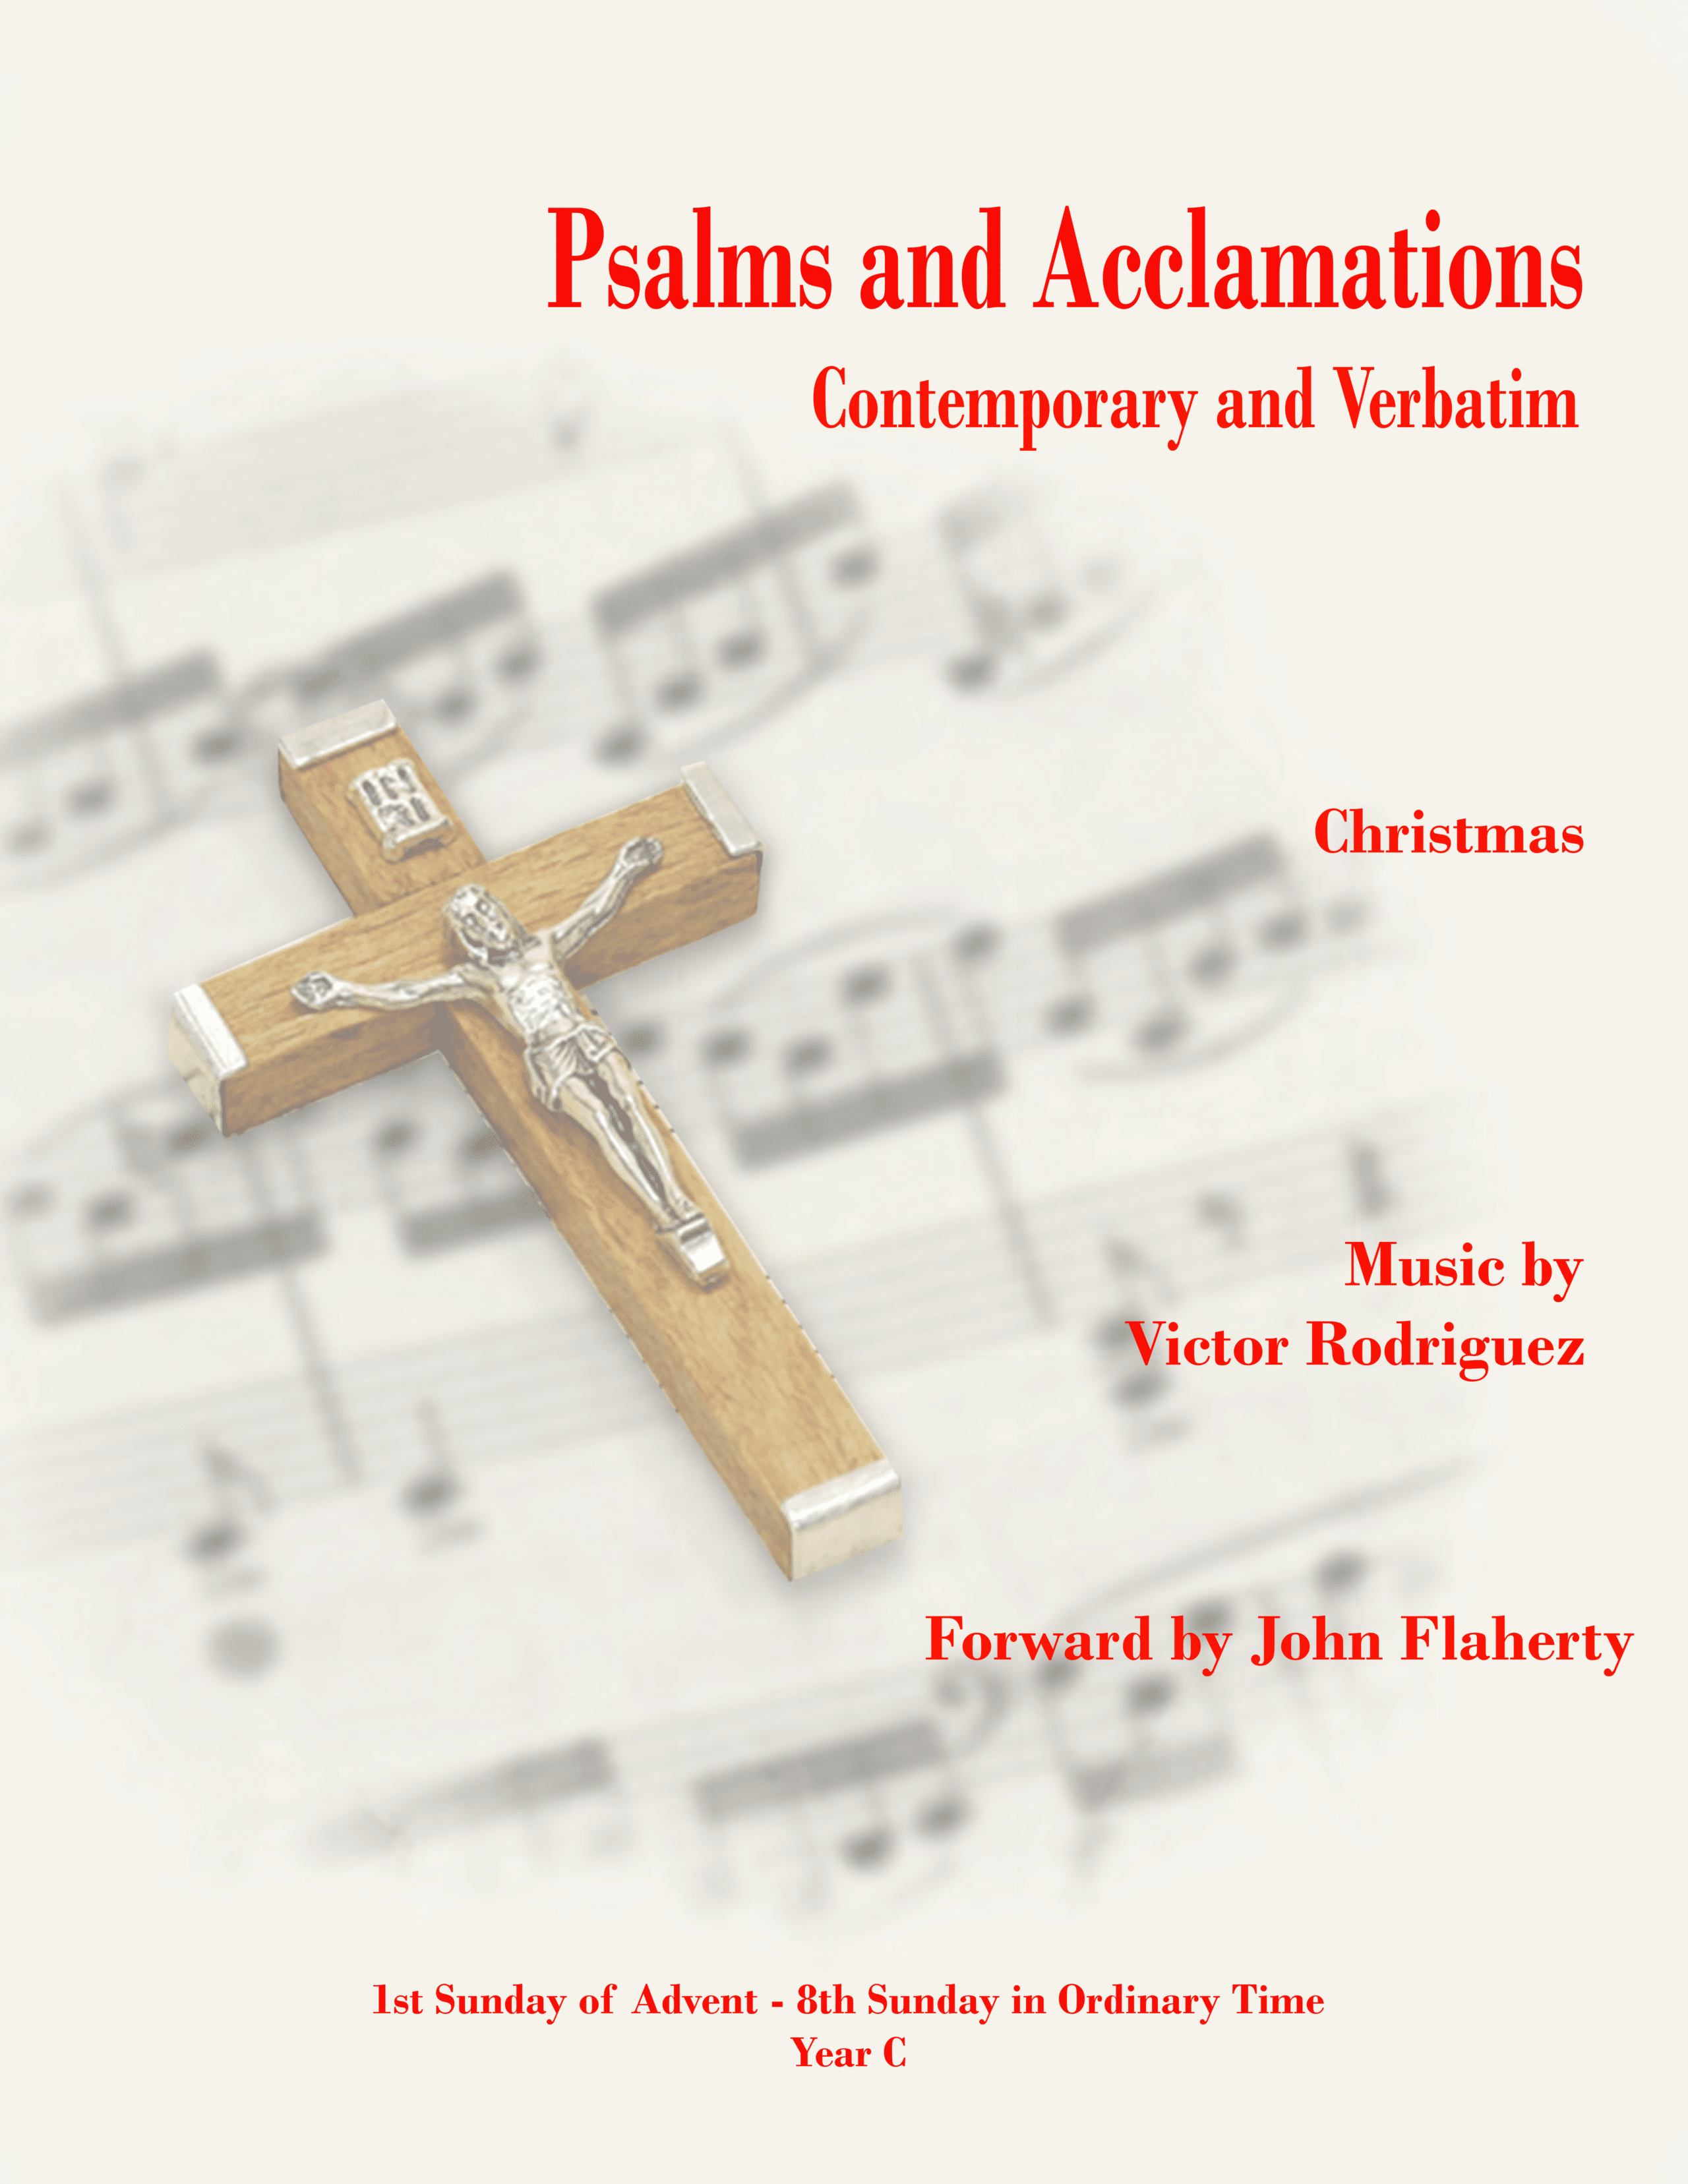 Psalms and Acclamations (Rodriguez) – Christmas, Year C